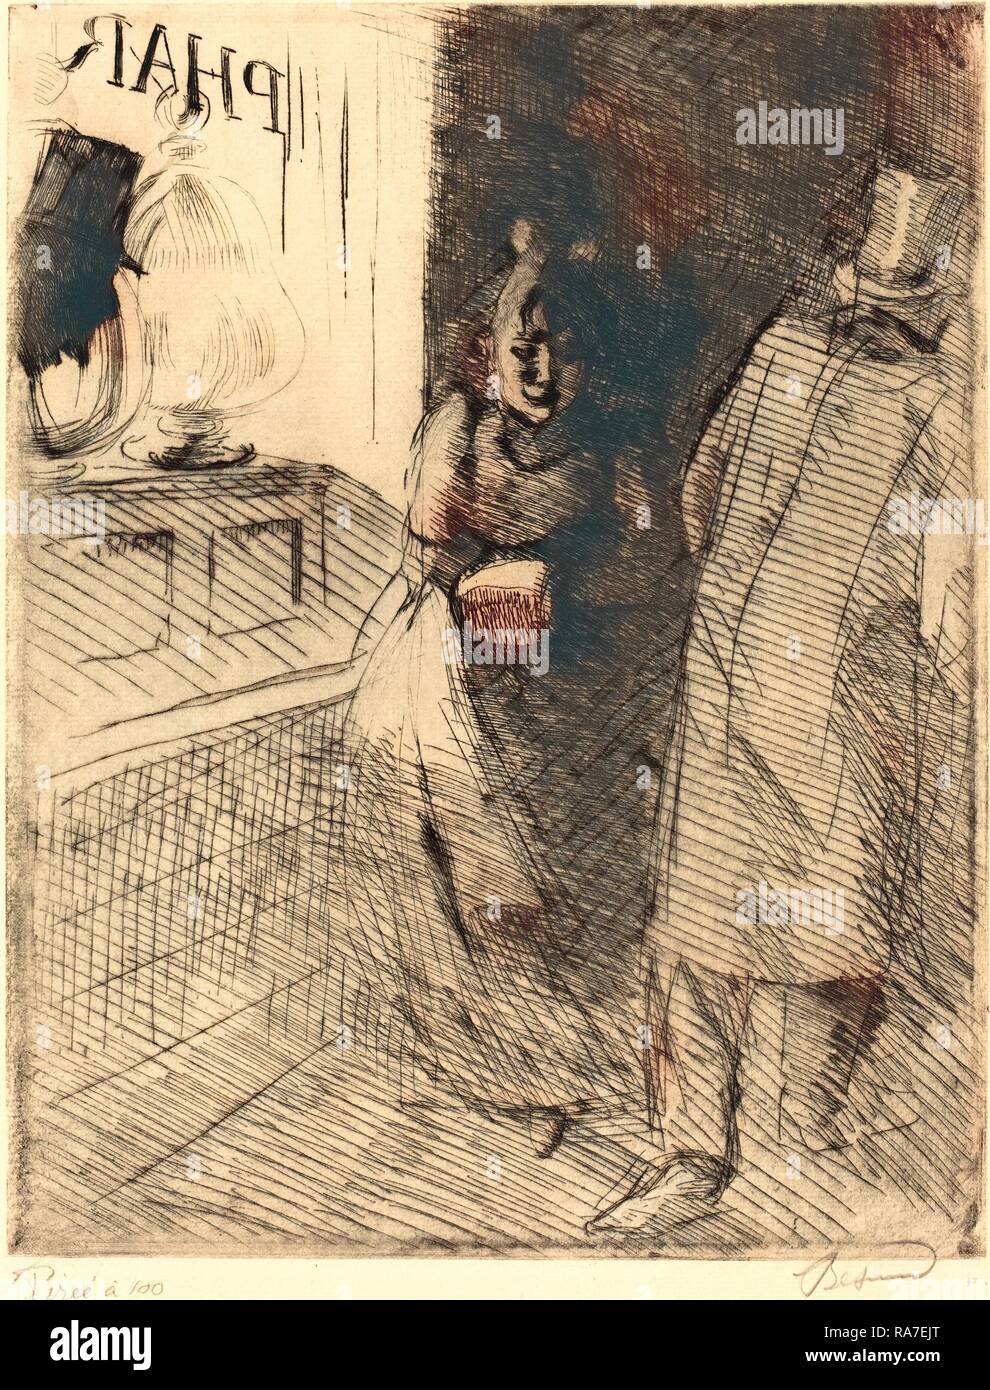 Albert Besnard, French (1849-1934), Prostitution (La Prostitution), c. 1886, etching and drypoint on laid paper reimagined Stock Photo